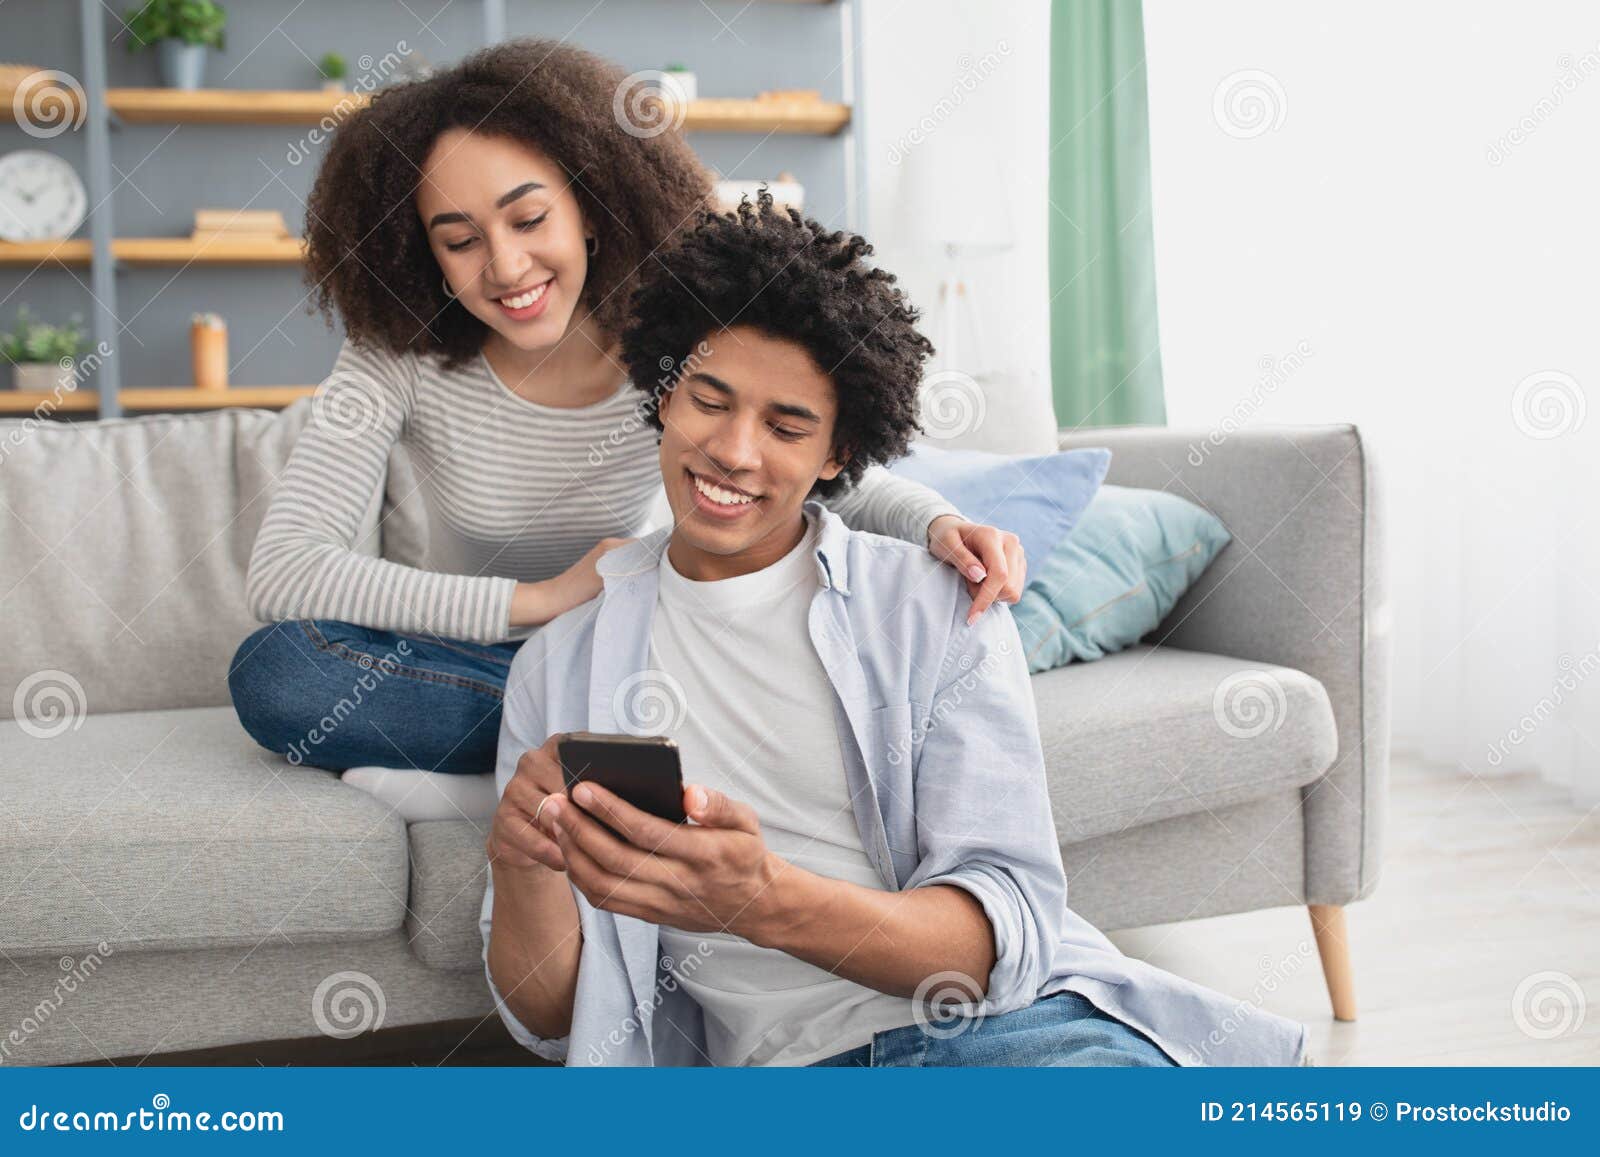 Funny Video, Read Message, Good Message and Ad at Home during Covid-19  Pandemic Stock Image - Image of funny, looking: 214565119